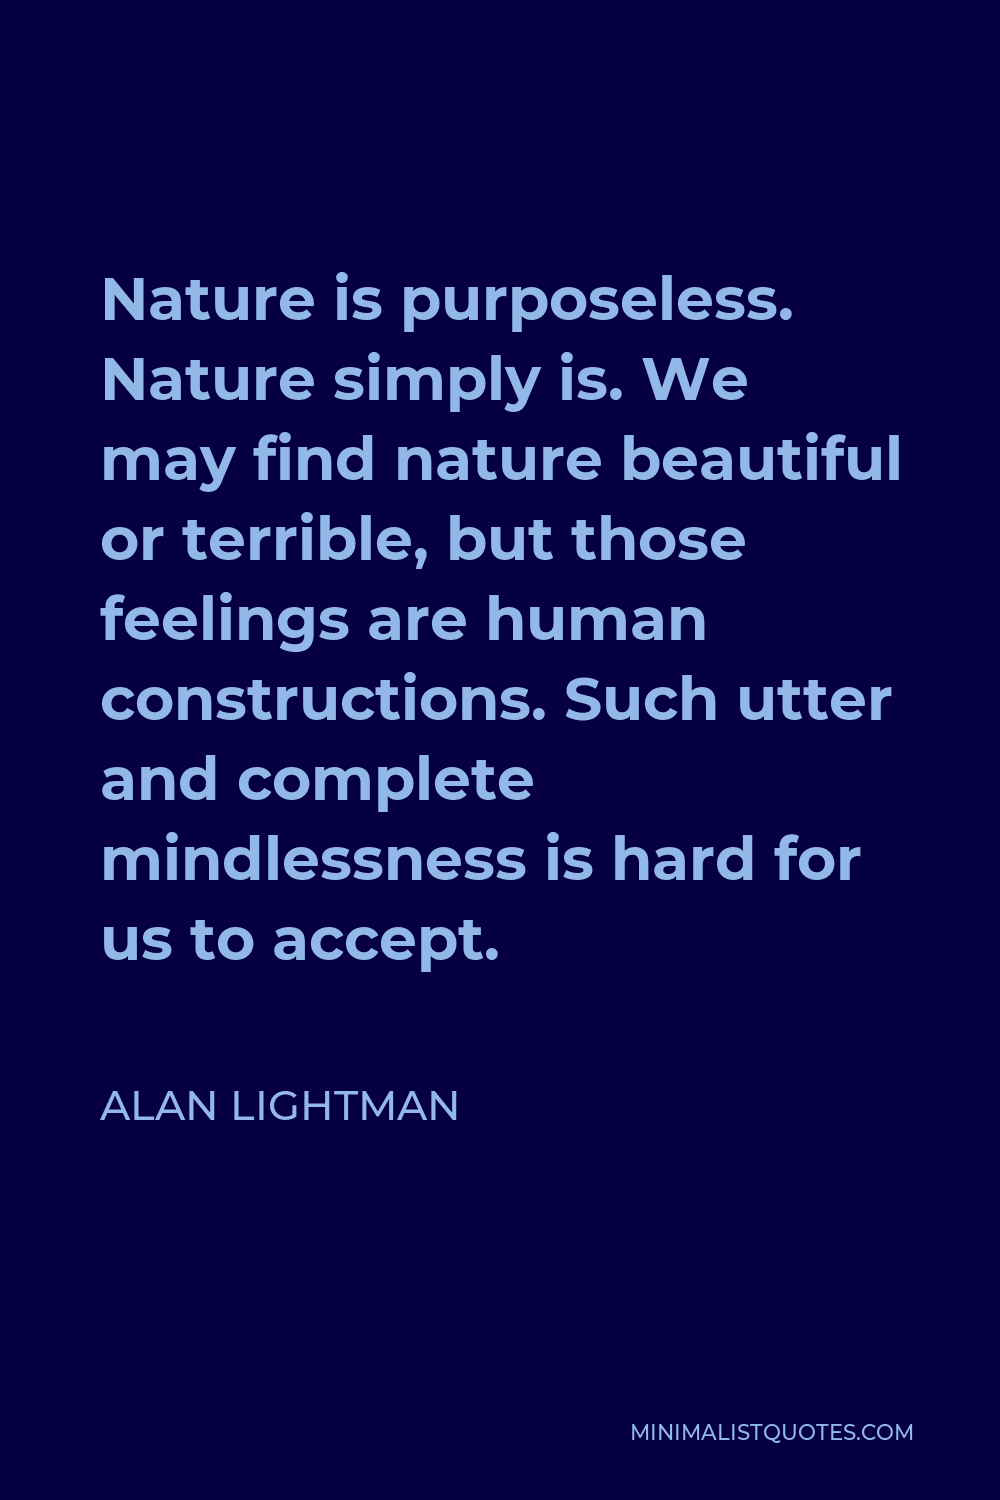 Alan Lightman Quote - Nature is purposeless. Nature simply is. We may find nature beautiful or terrible, but those feelings are human constructions. Such utter and complete mindlessness is hard for us to accept.